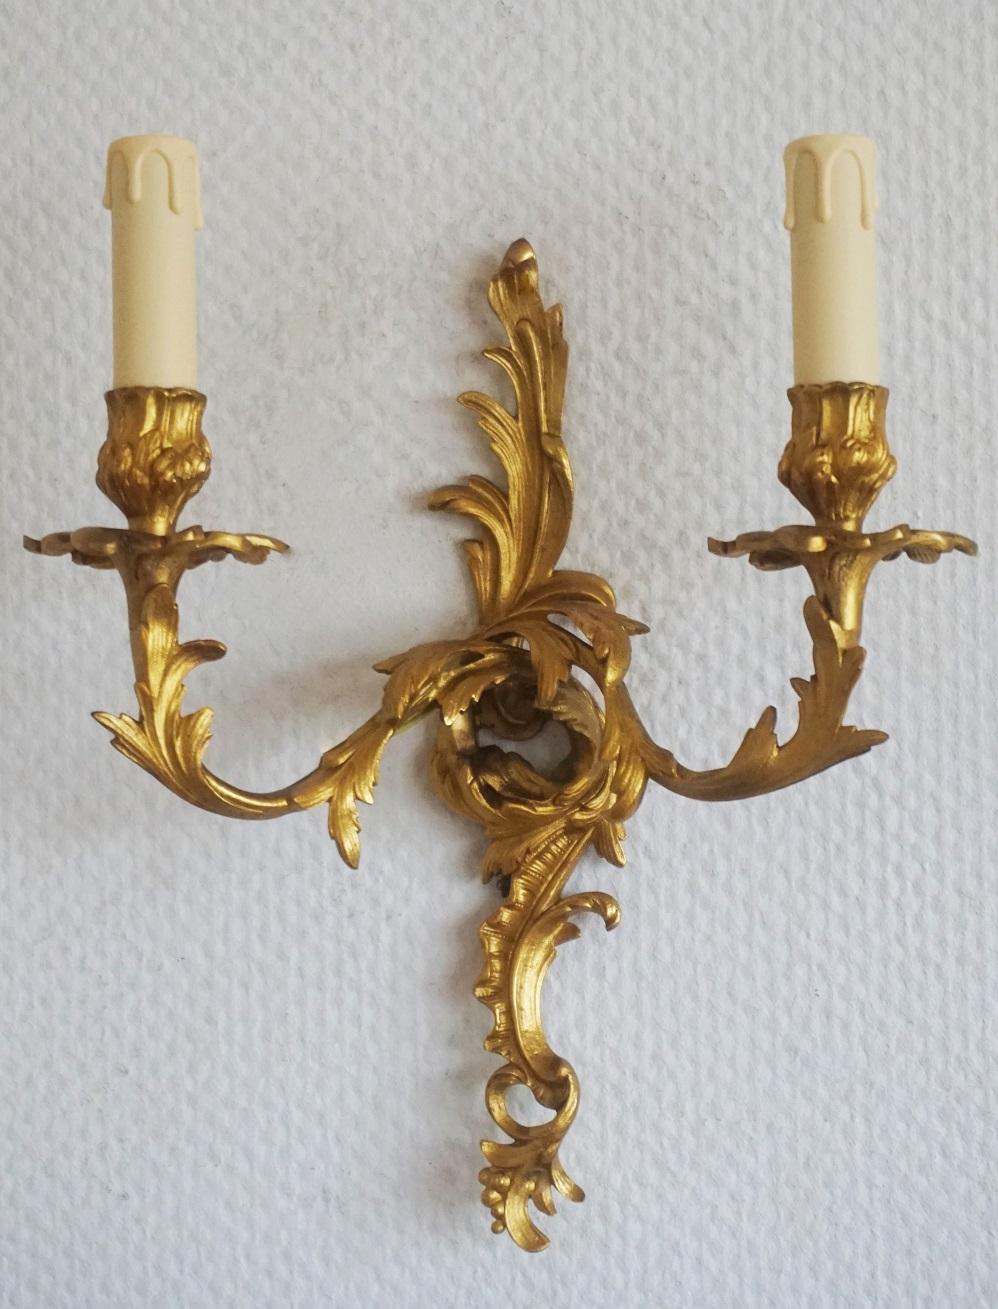 A pair of Louis XVI style gilt bronze two-light sconces richly decorated with foliage, France, circa 1880-1890. Shades not included.
Two E14 candelabras light bulb holders with candle covers (each sconce).
Measures:
Height 14